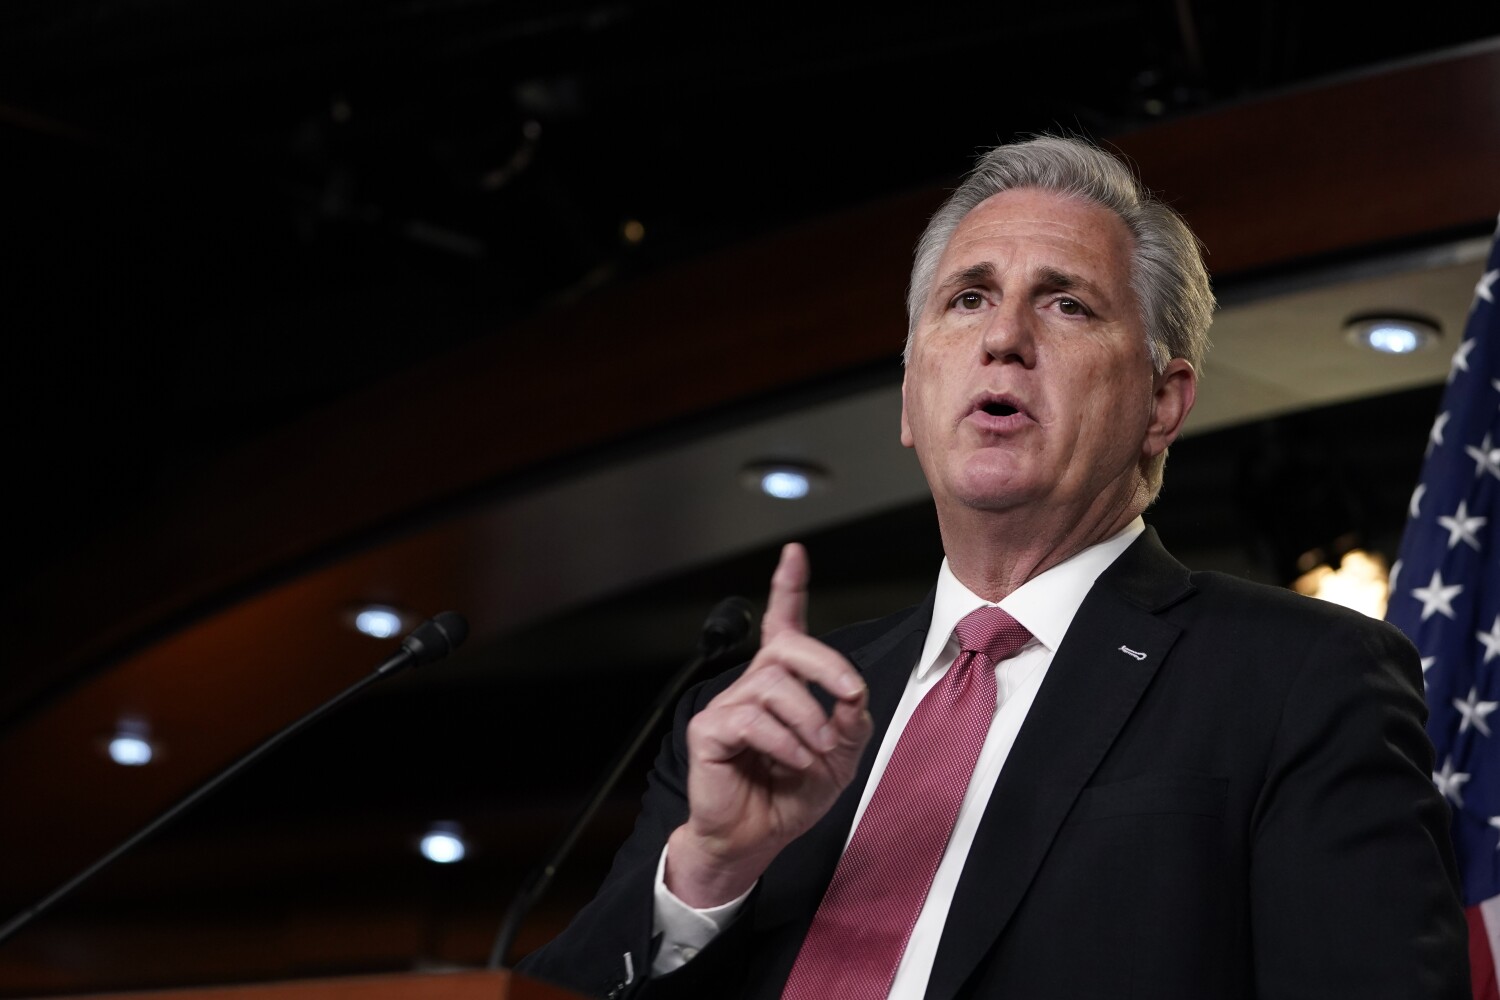 Rep. Kevin McCarthy attended his son's wedding in California amid deadly COVID-19 surge